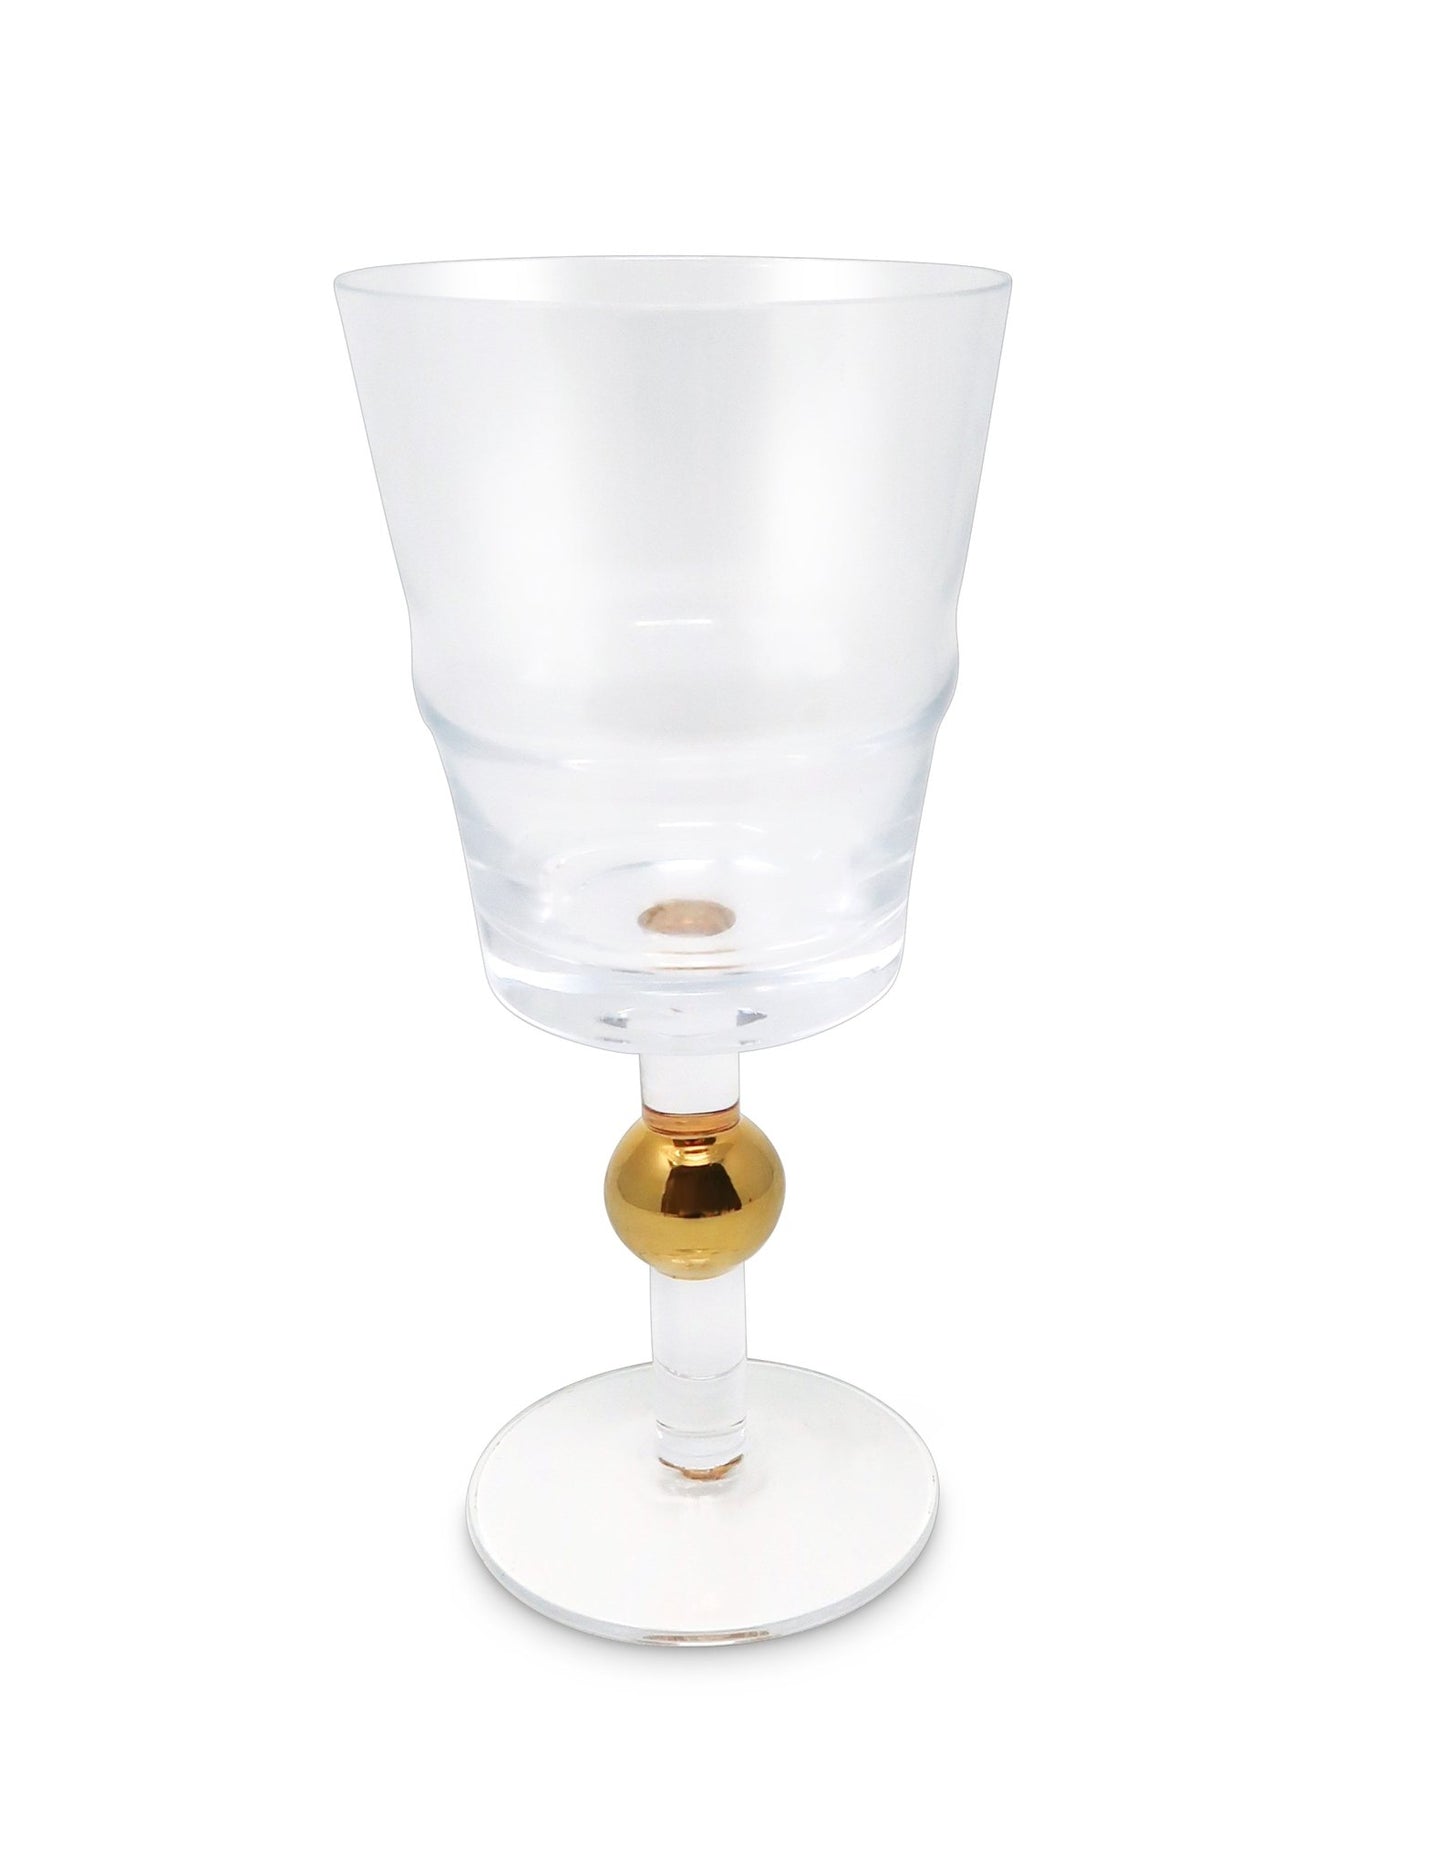 Set of 6 Glasses with Gold Ball Design - HOUSE OF SHE